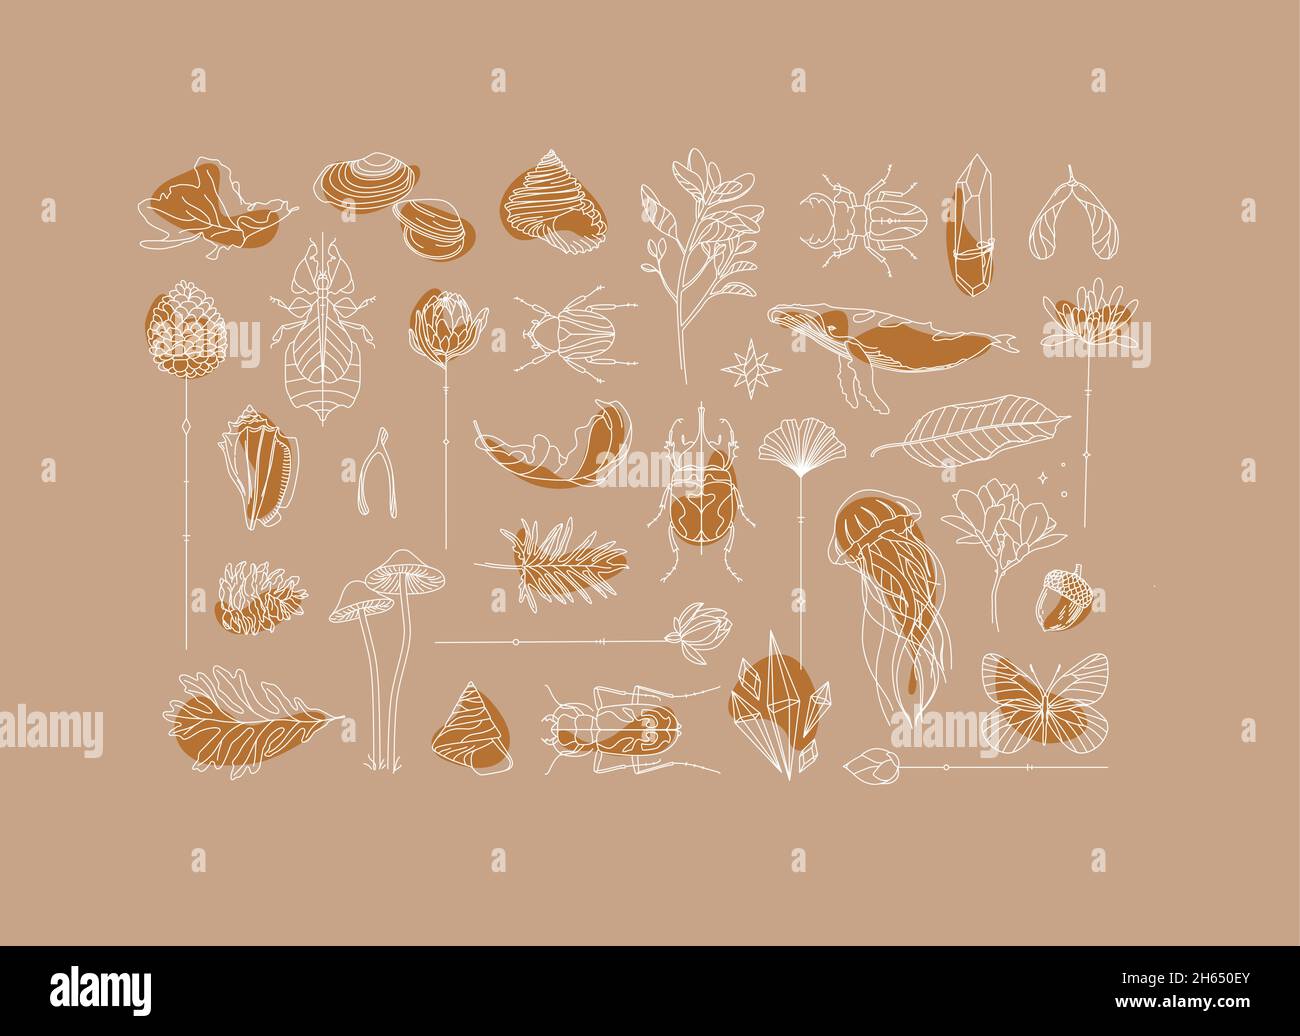 Art Deco flora and fauna collection drawing on beige background Stock Vector